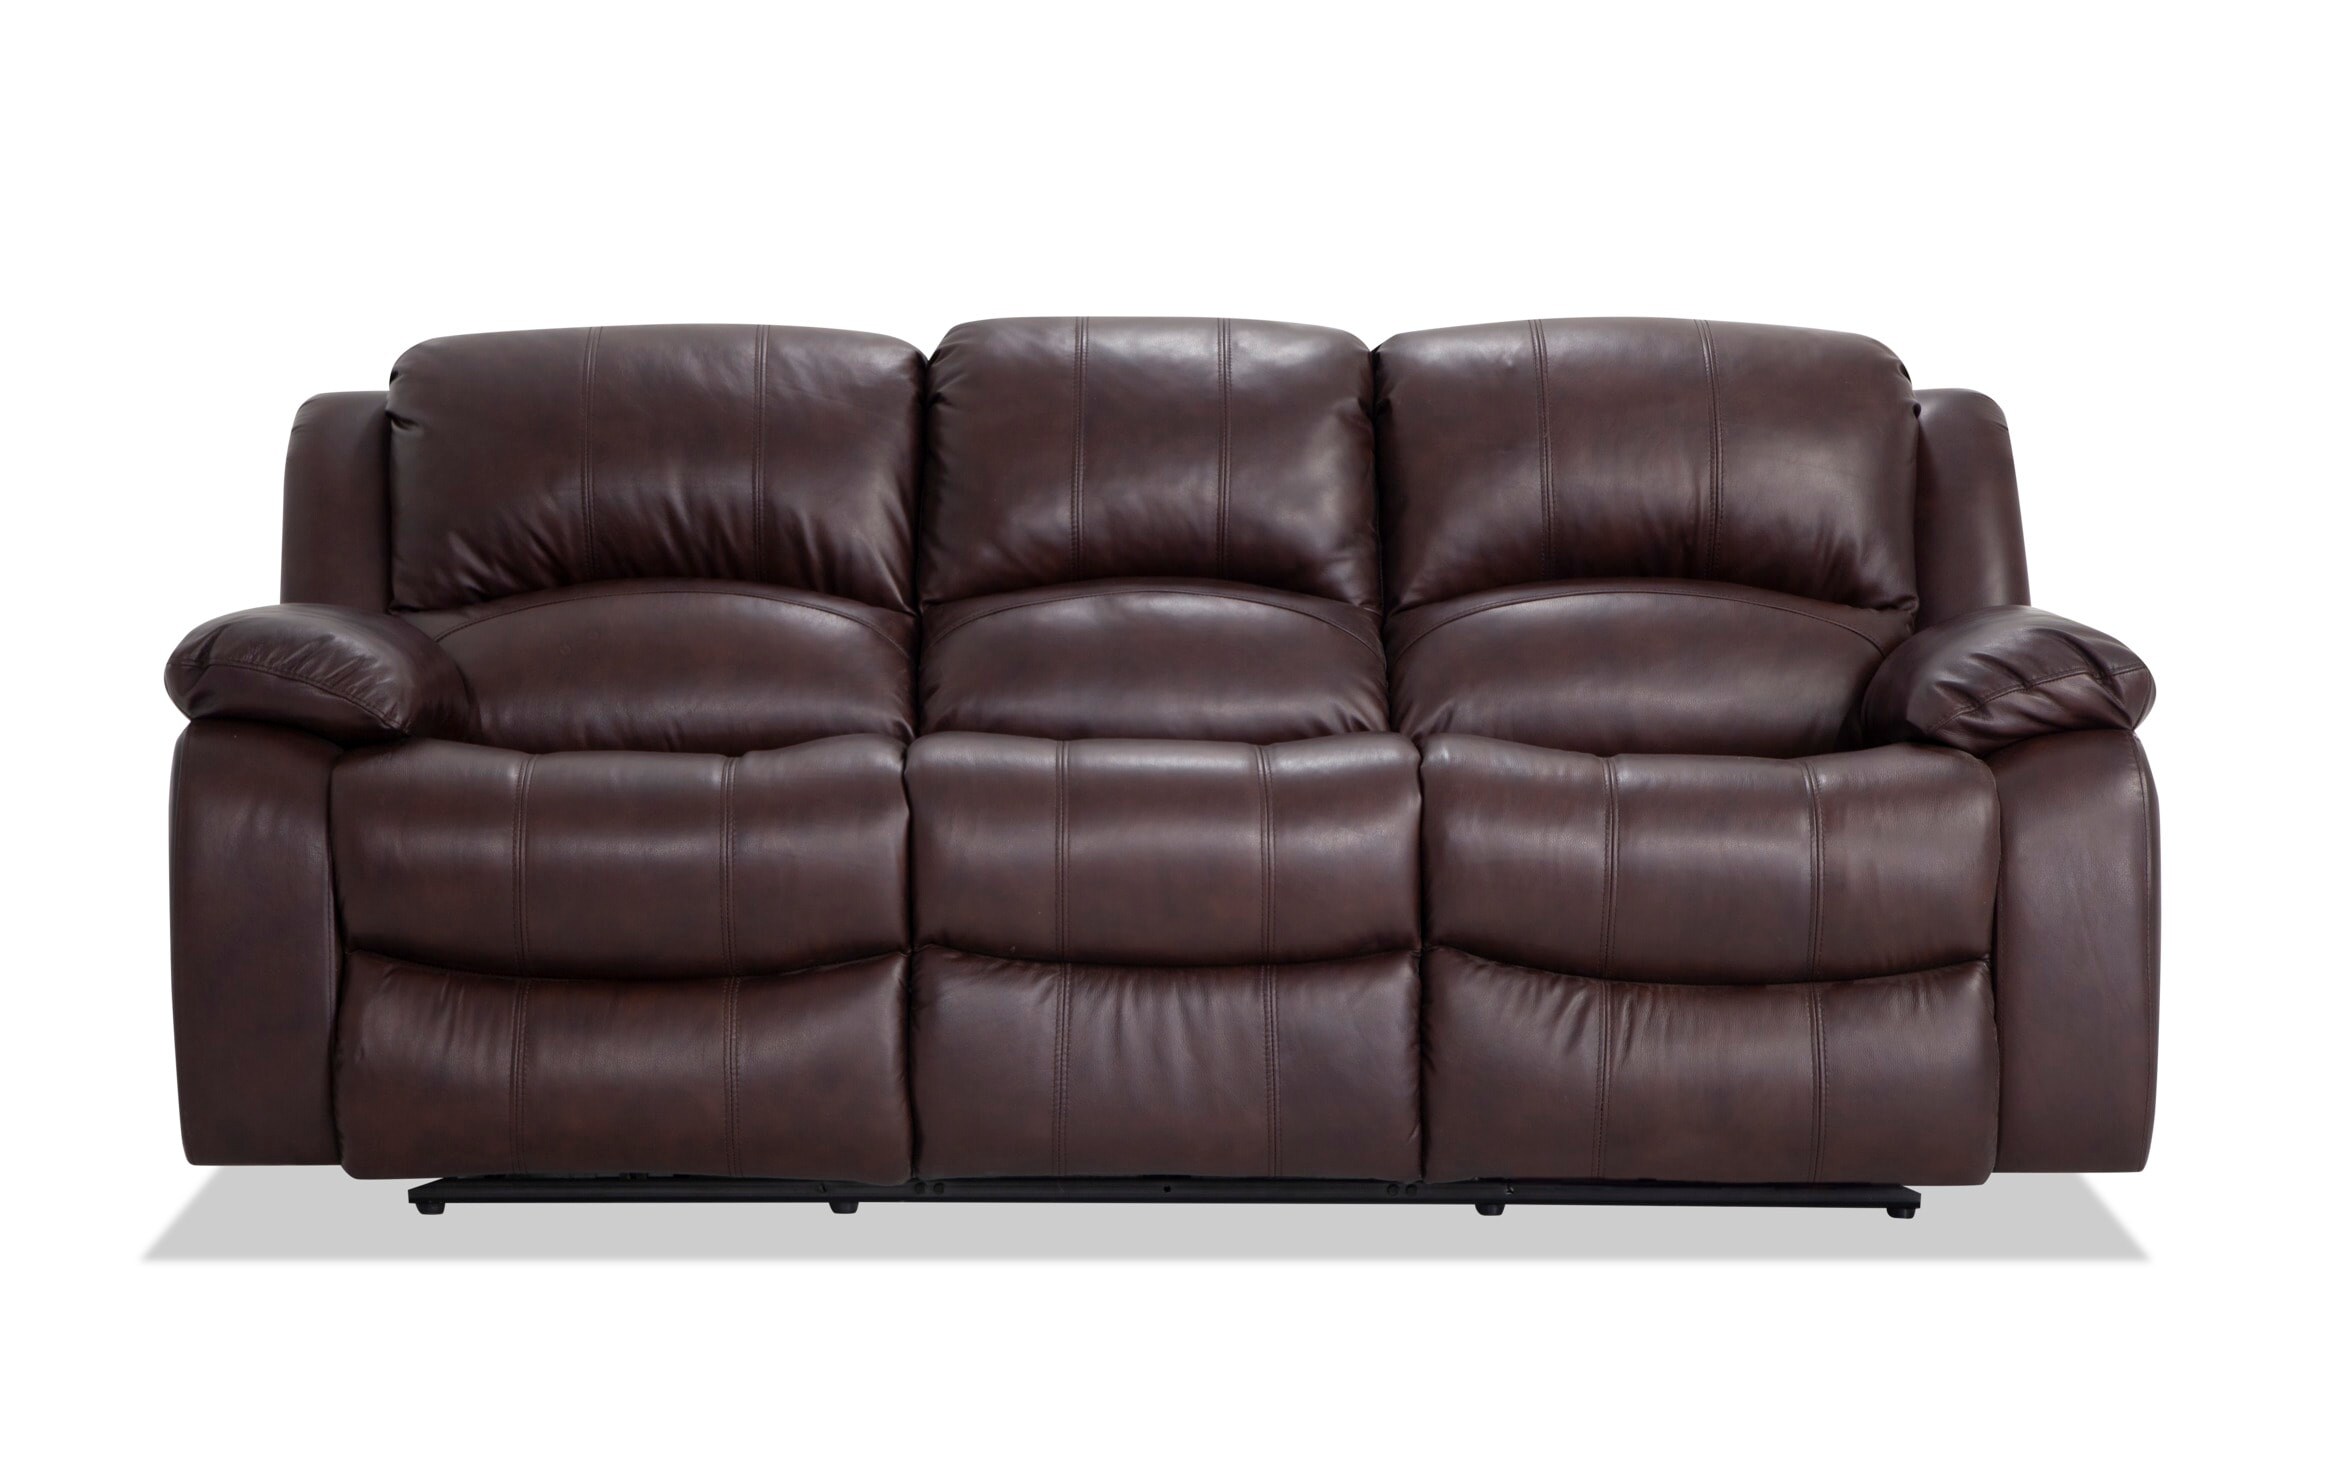 Olympus Brown Leather Power Reclining, Best Leather Power Reclining Sofa